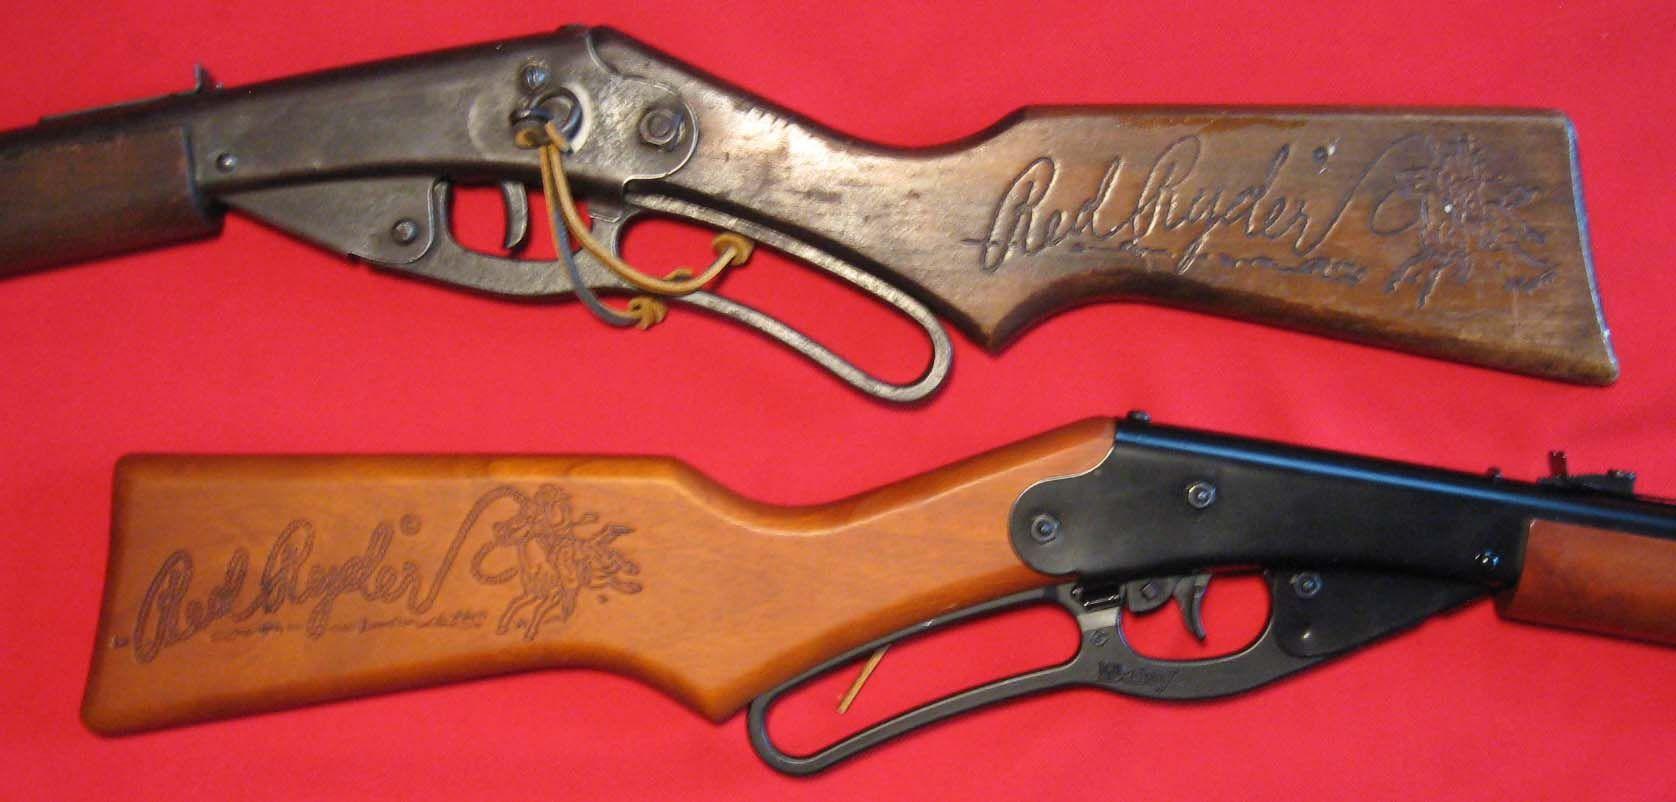 Red Ryder Logo - The Daisy Red Ryder Carbine, Then, and Now | A Tale of Two Thirties